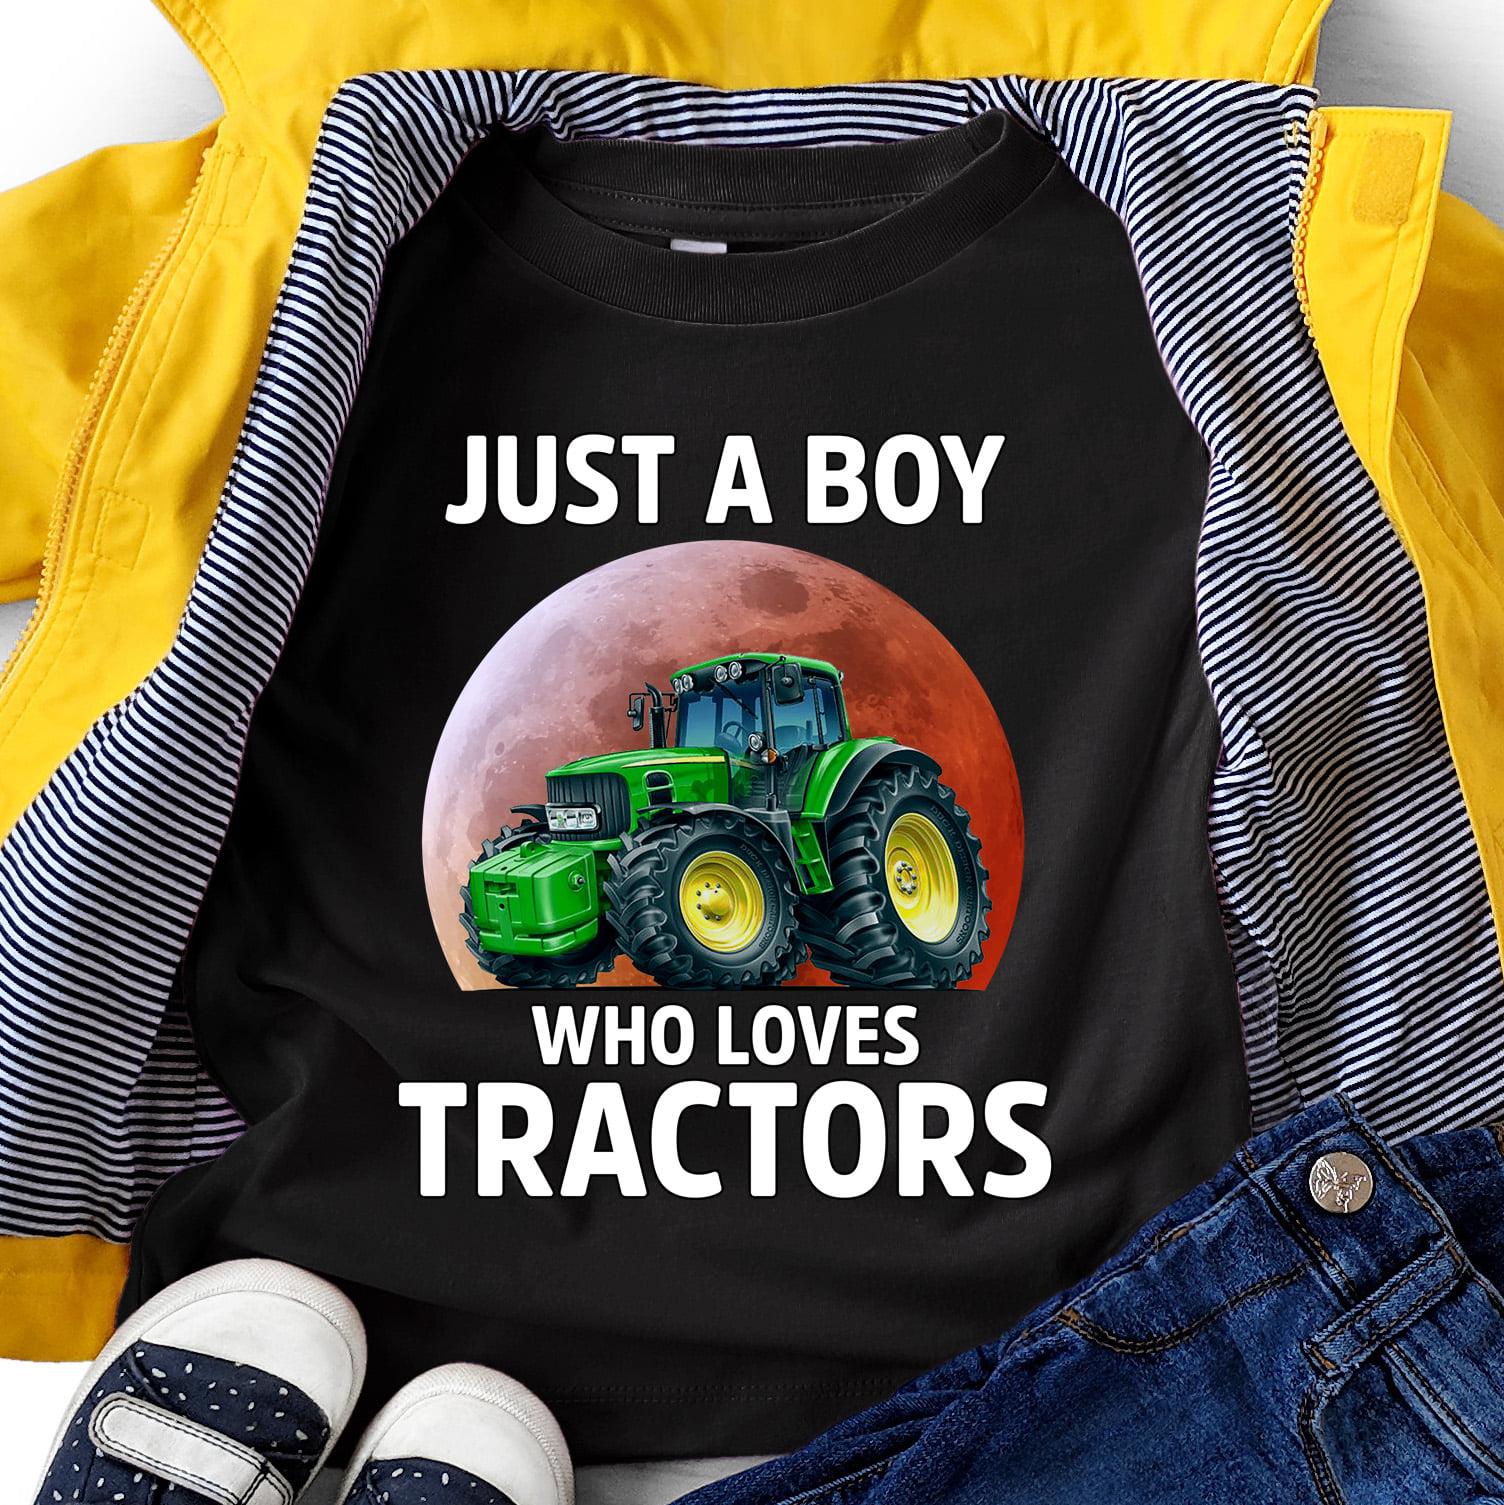 Tractor Graphic T-shirt - Just a boy who loves tractors